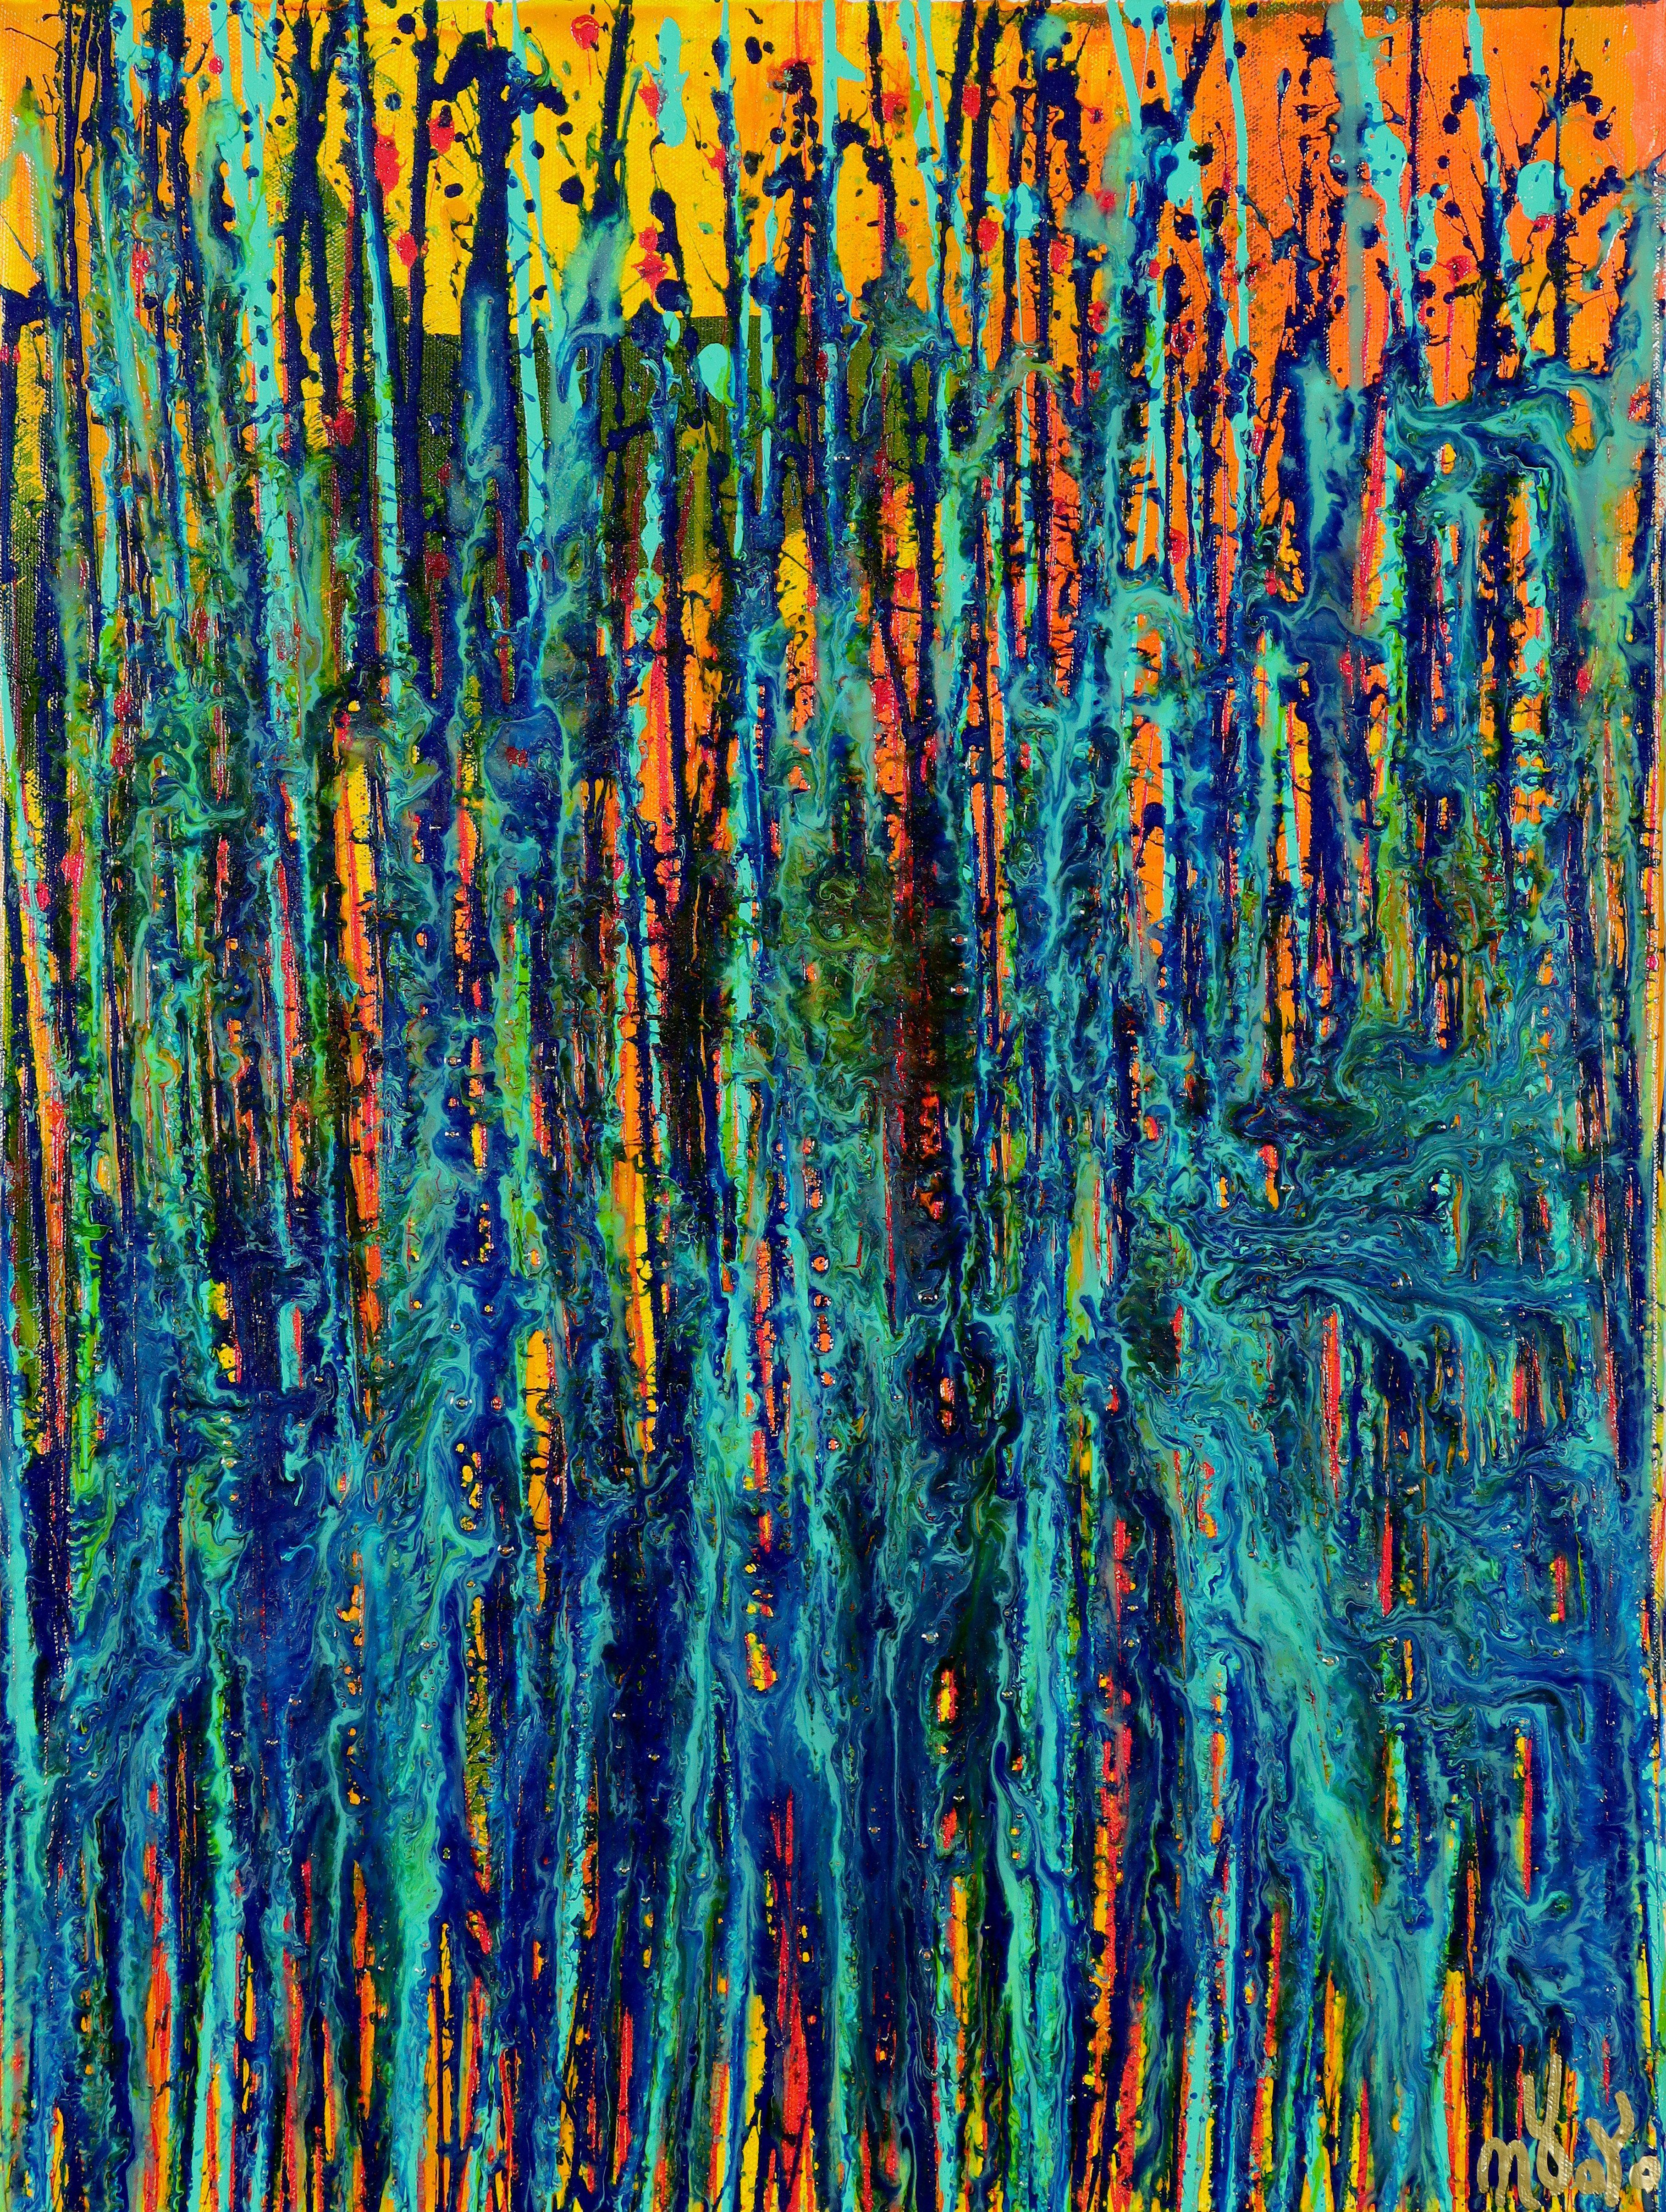 This radiant modern abstract was created blending iridescent drizzles of acrylic paint in random yet calming pattern.    A color palette of turquoise, blues, yellow over orange, most colors mixed with mica for reflectivity and depth.    This